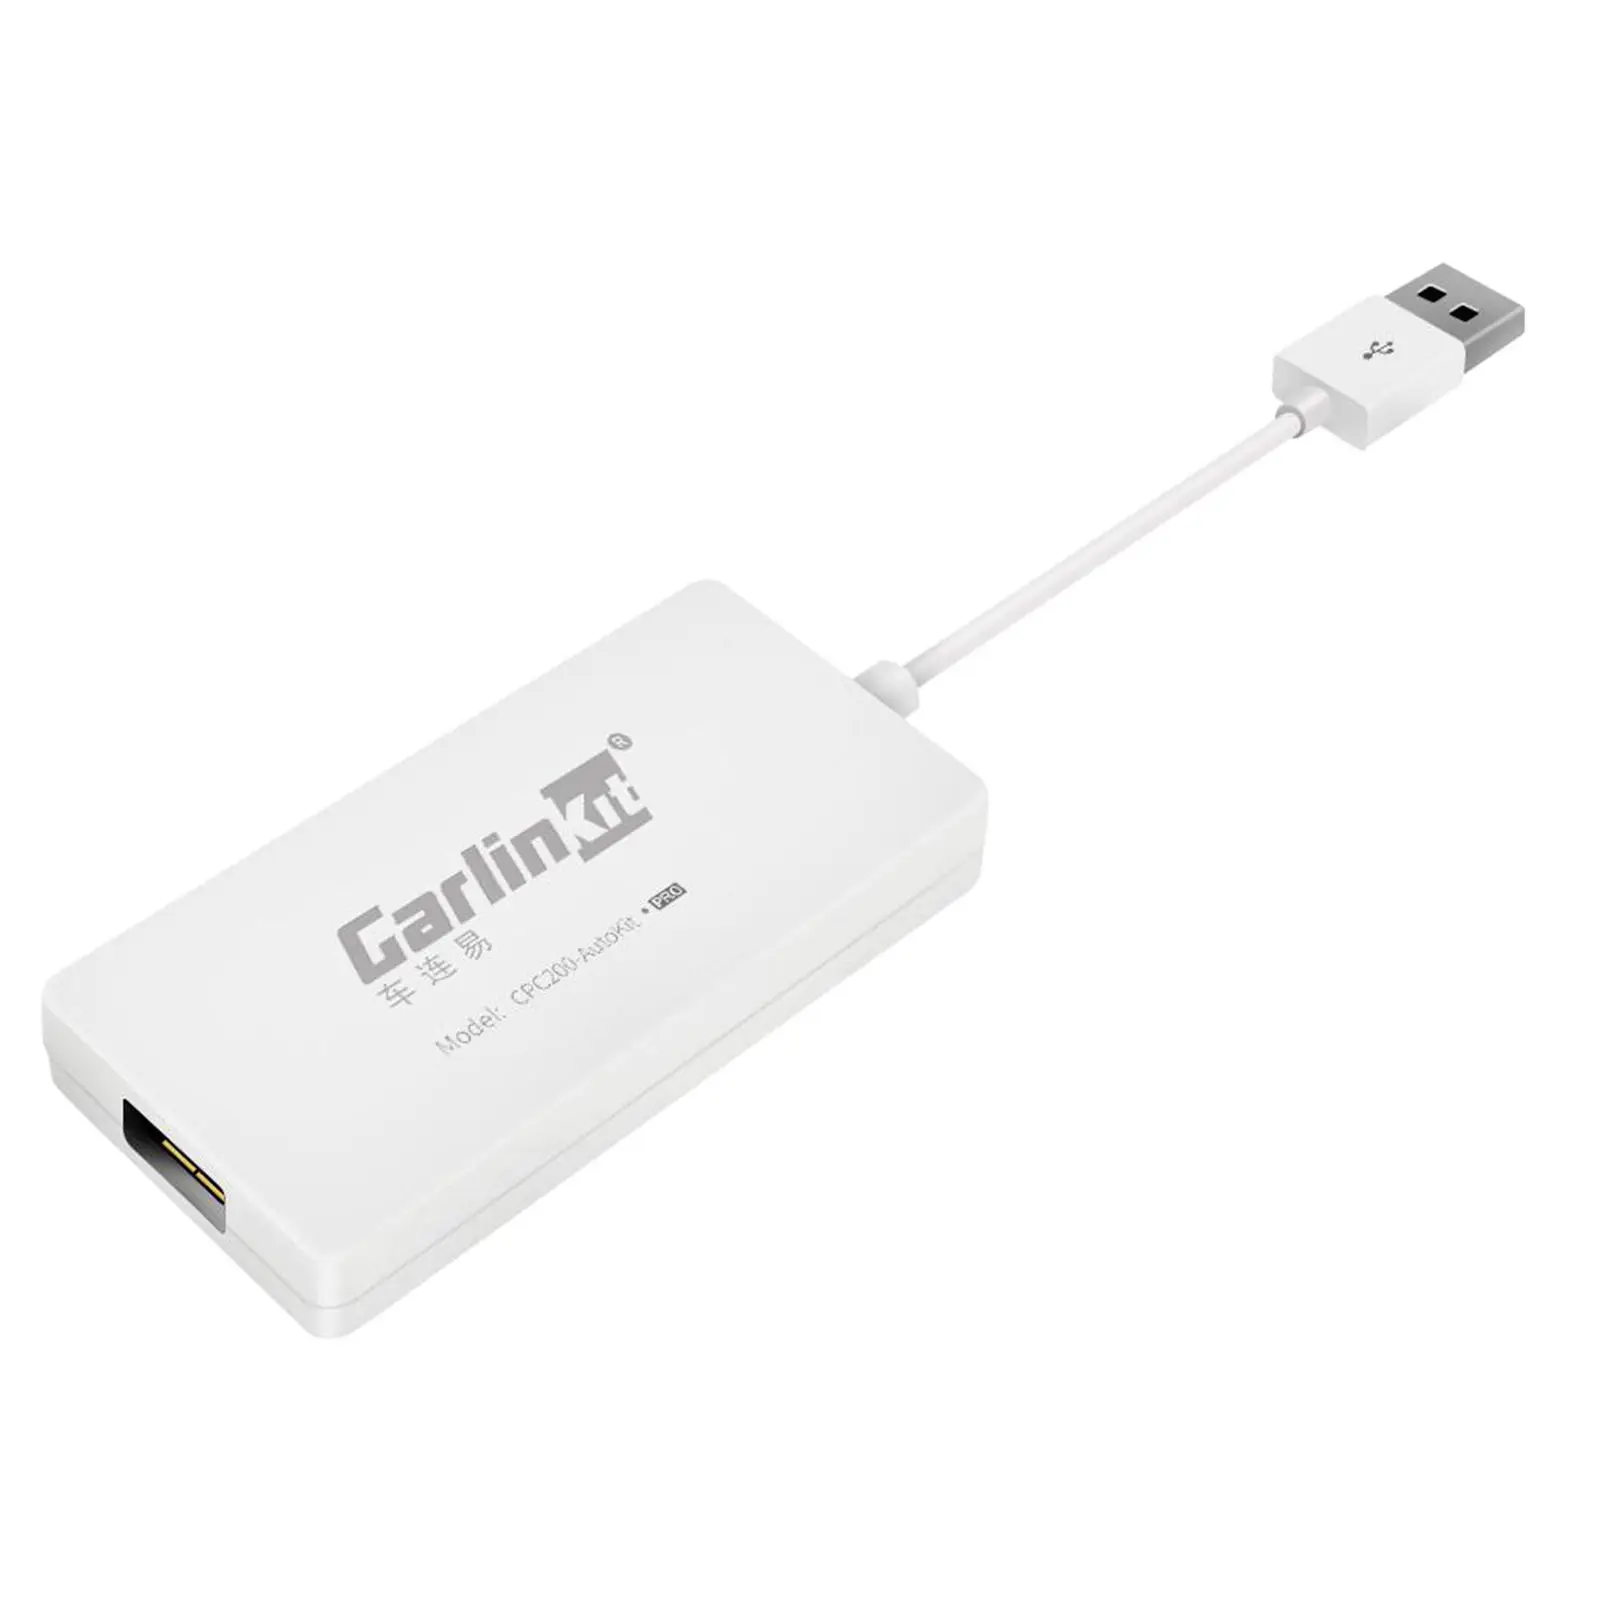 Carlinkit Wireless Connection  Dongle for Android Navigation Player Smart Link USB  Stick with Android Auto